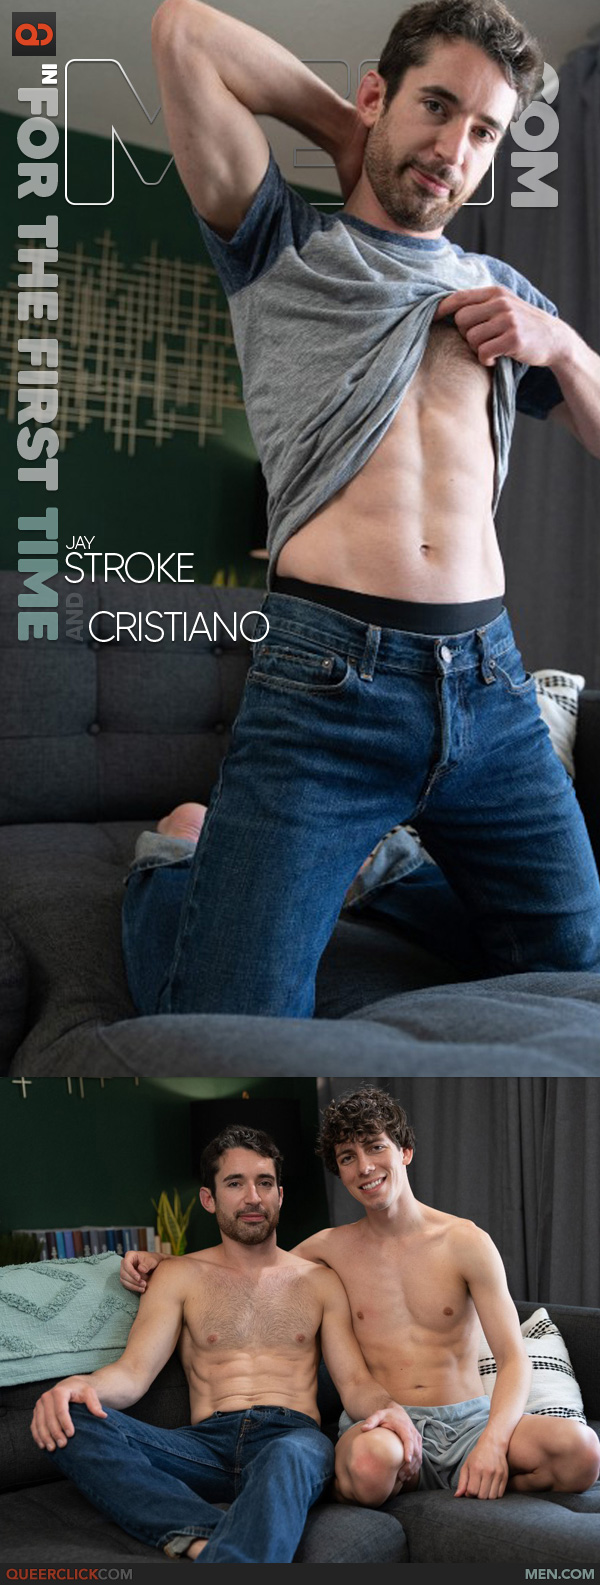 Men.com: Jay Stroke and Cristiano - For The First Time